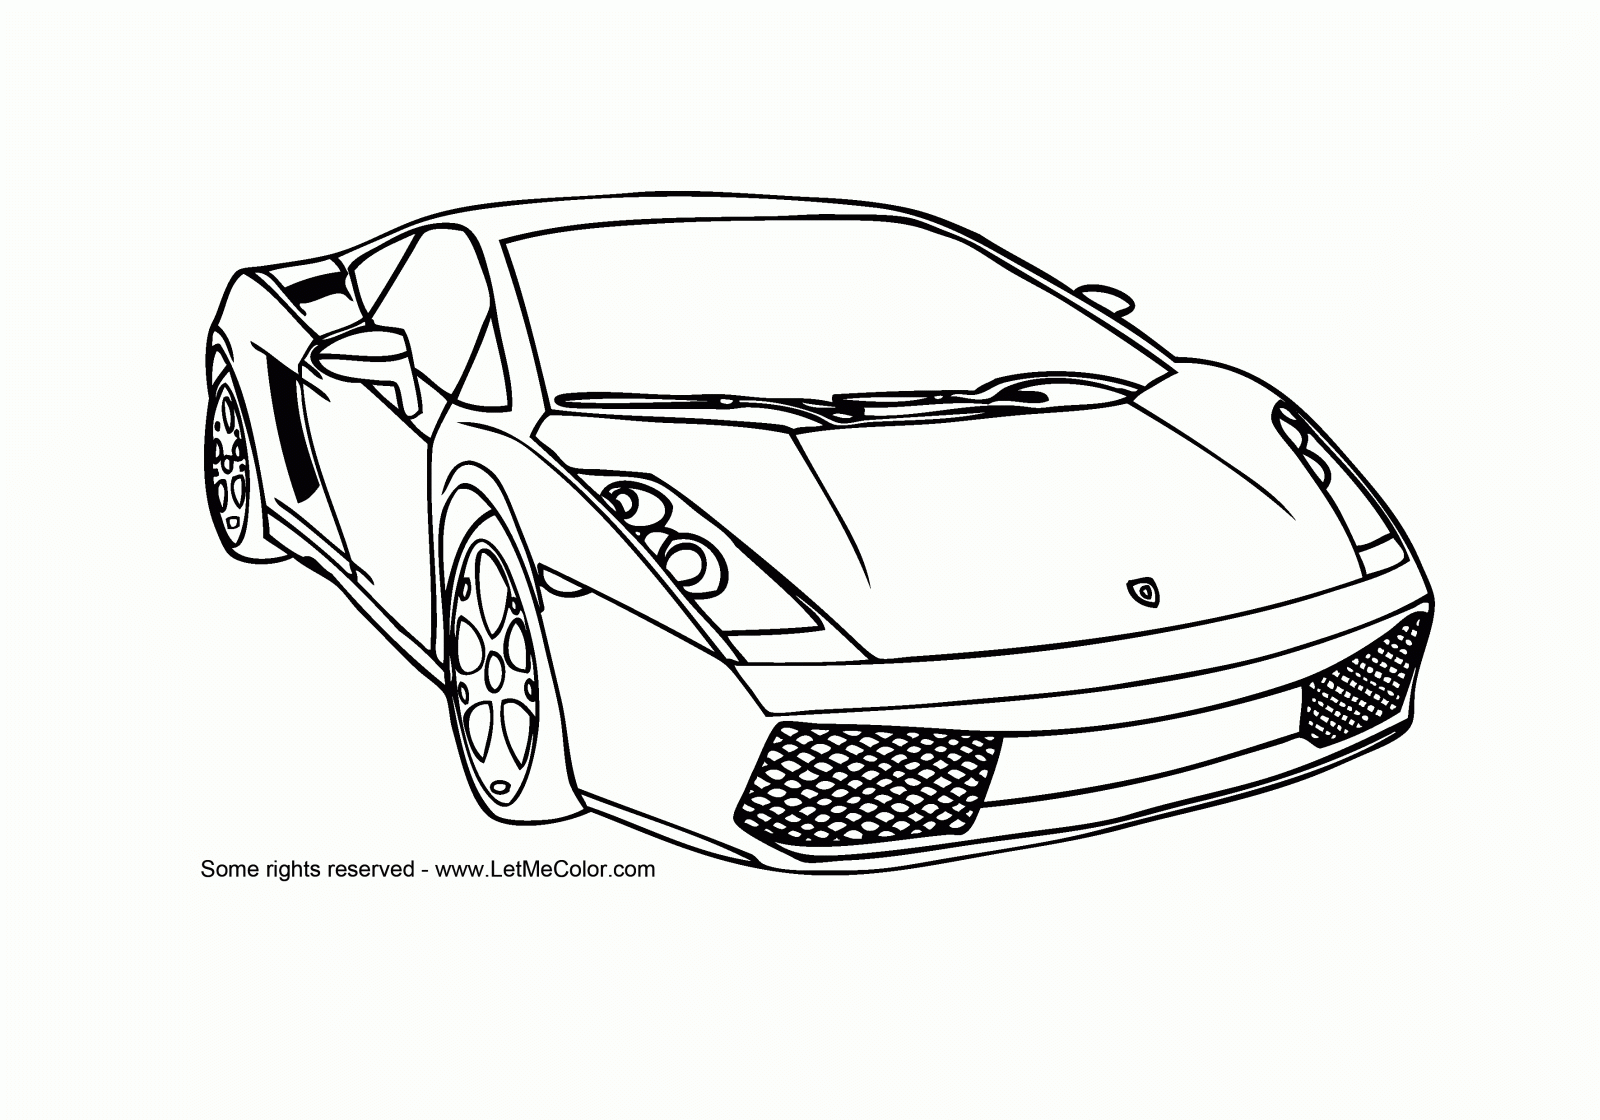 Ingenuity 25 Sports Car Coloring Pages For Children 14 Printable ...